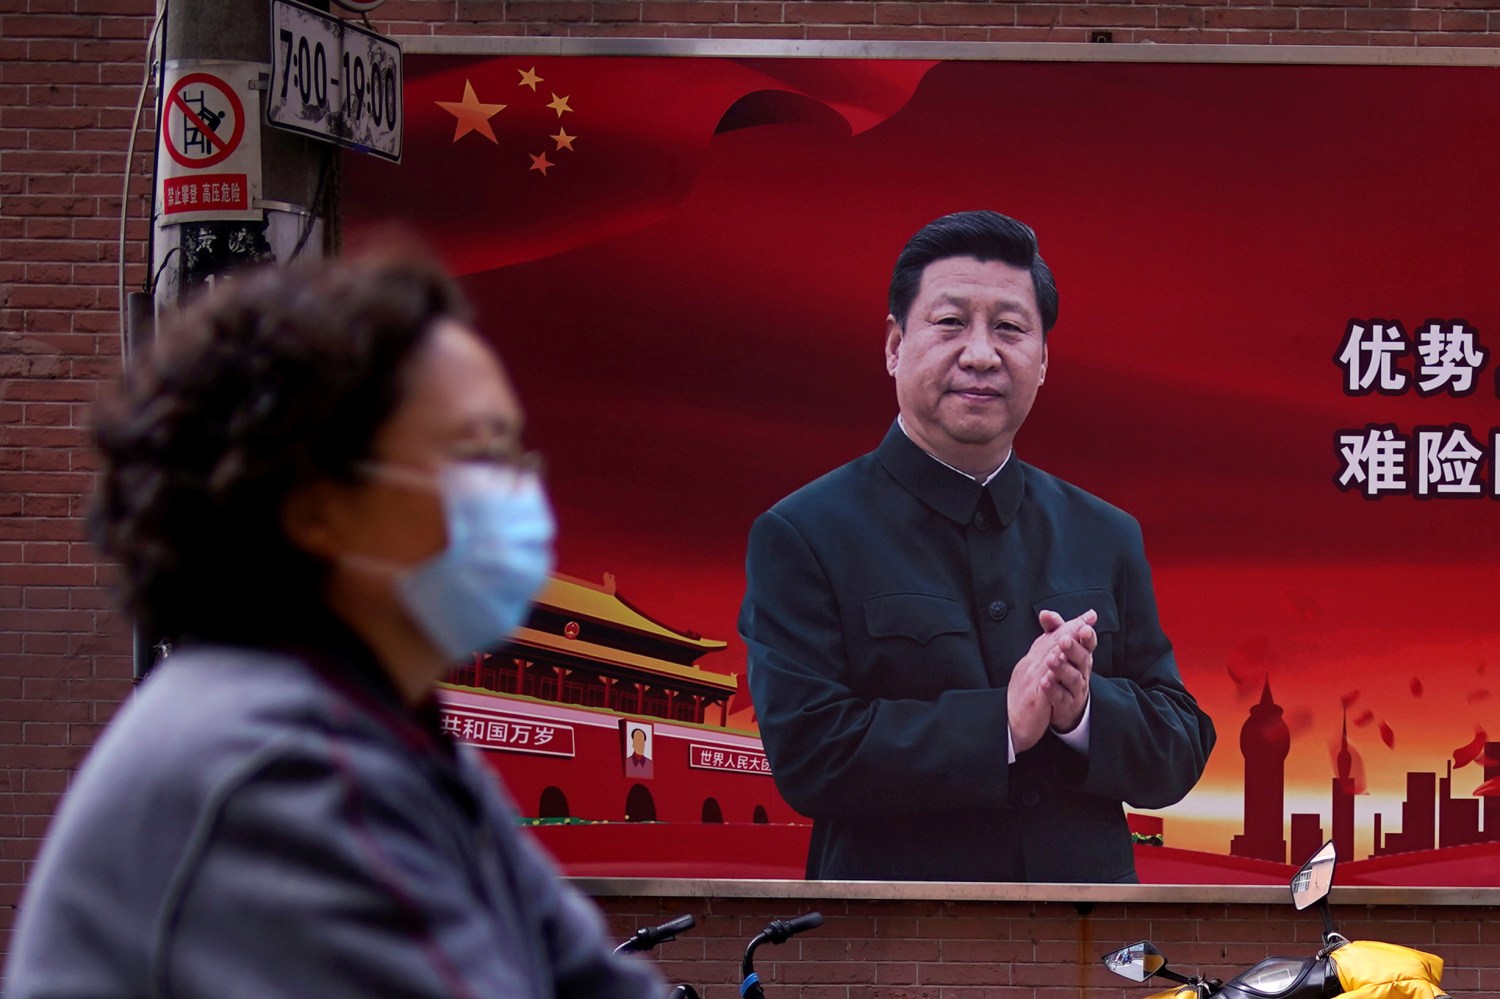 FILE PHOTO: A woman wearing a protective mask is seen past a portrait of Chinese President Xi Jinping on a street as the country is hit by an outbreak of the coronavirus, in Shanghai, China March 12, 2020. REUTERS/Aly Song/File Photo